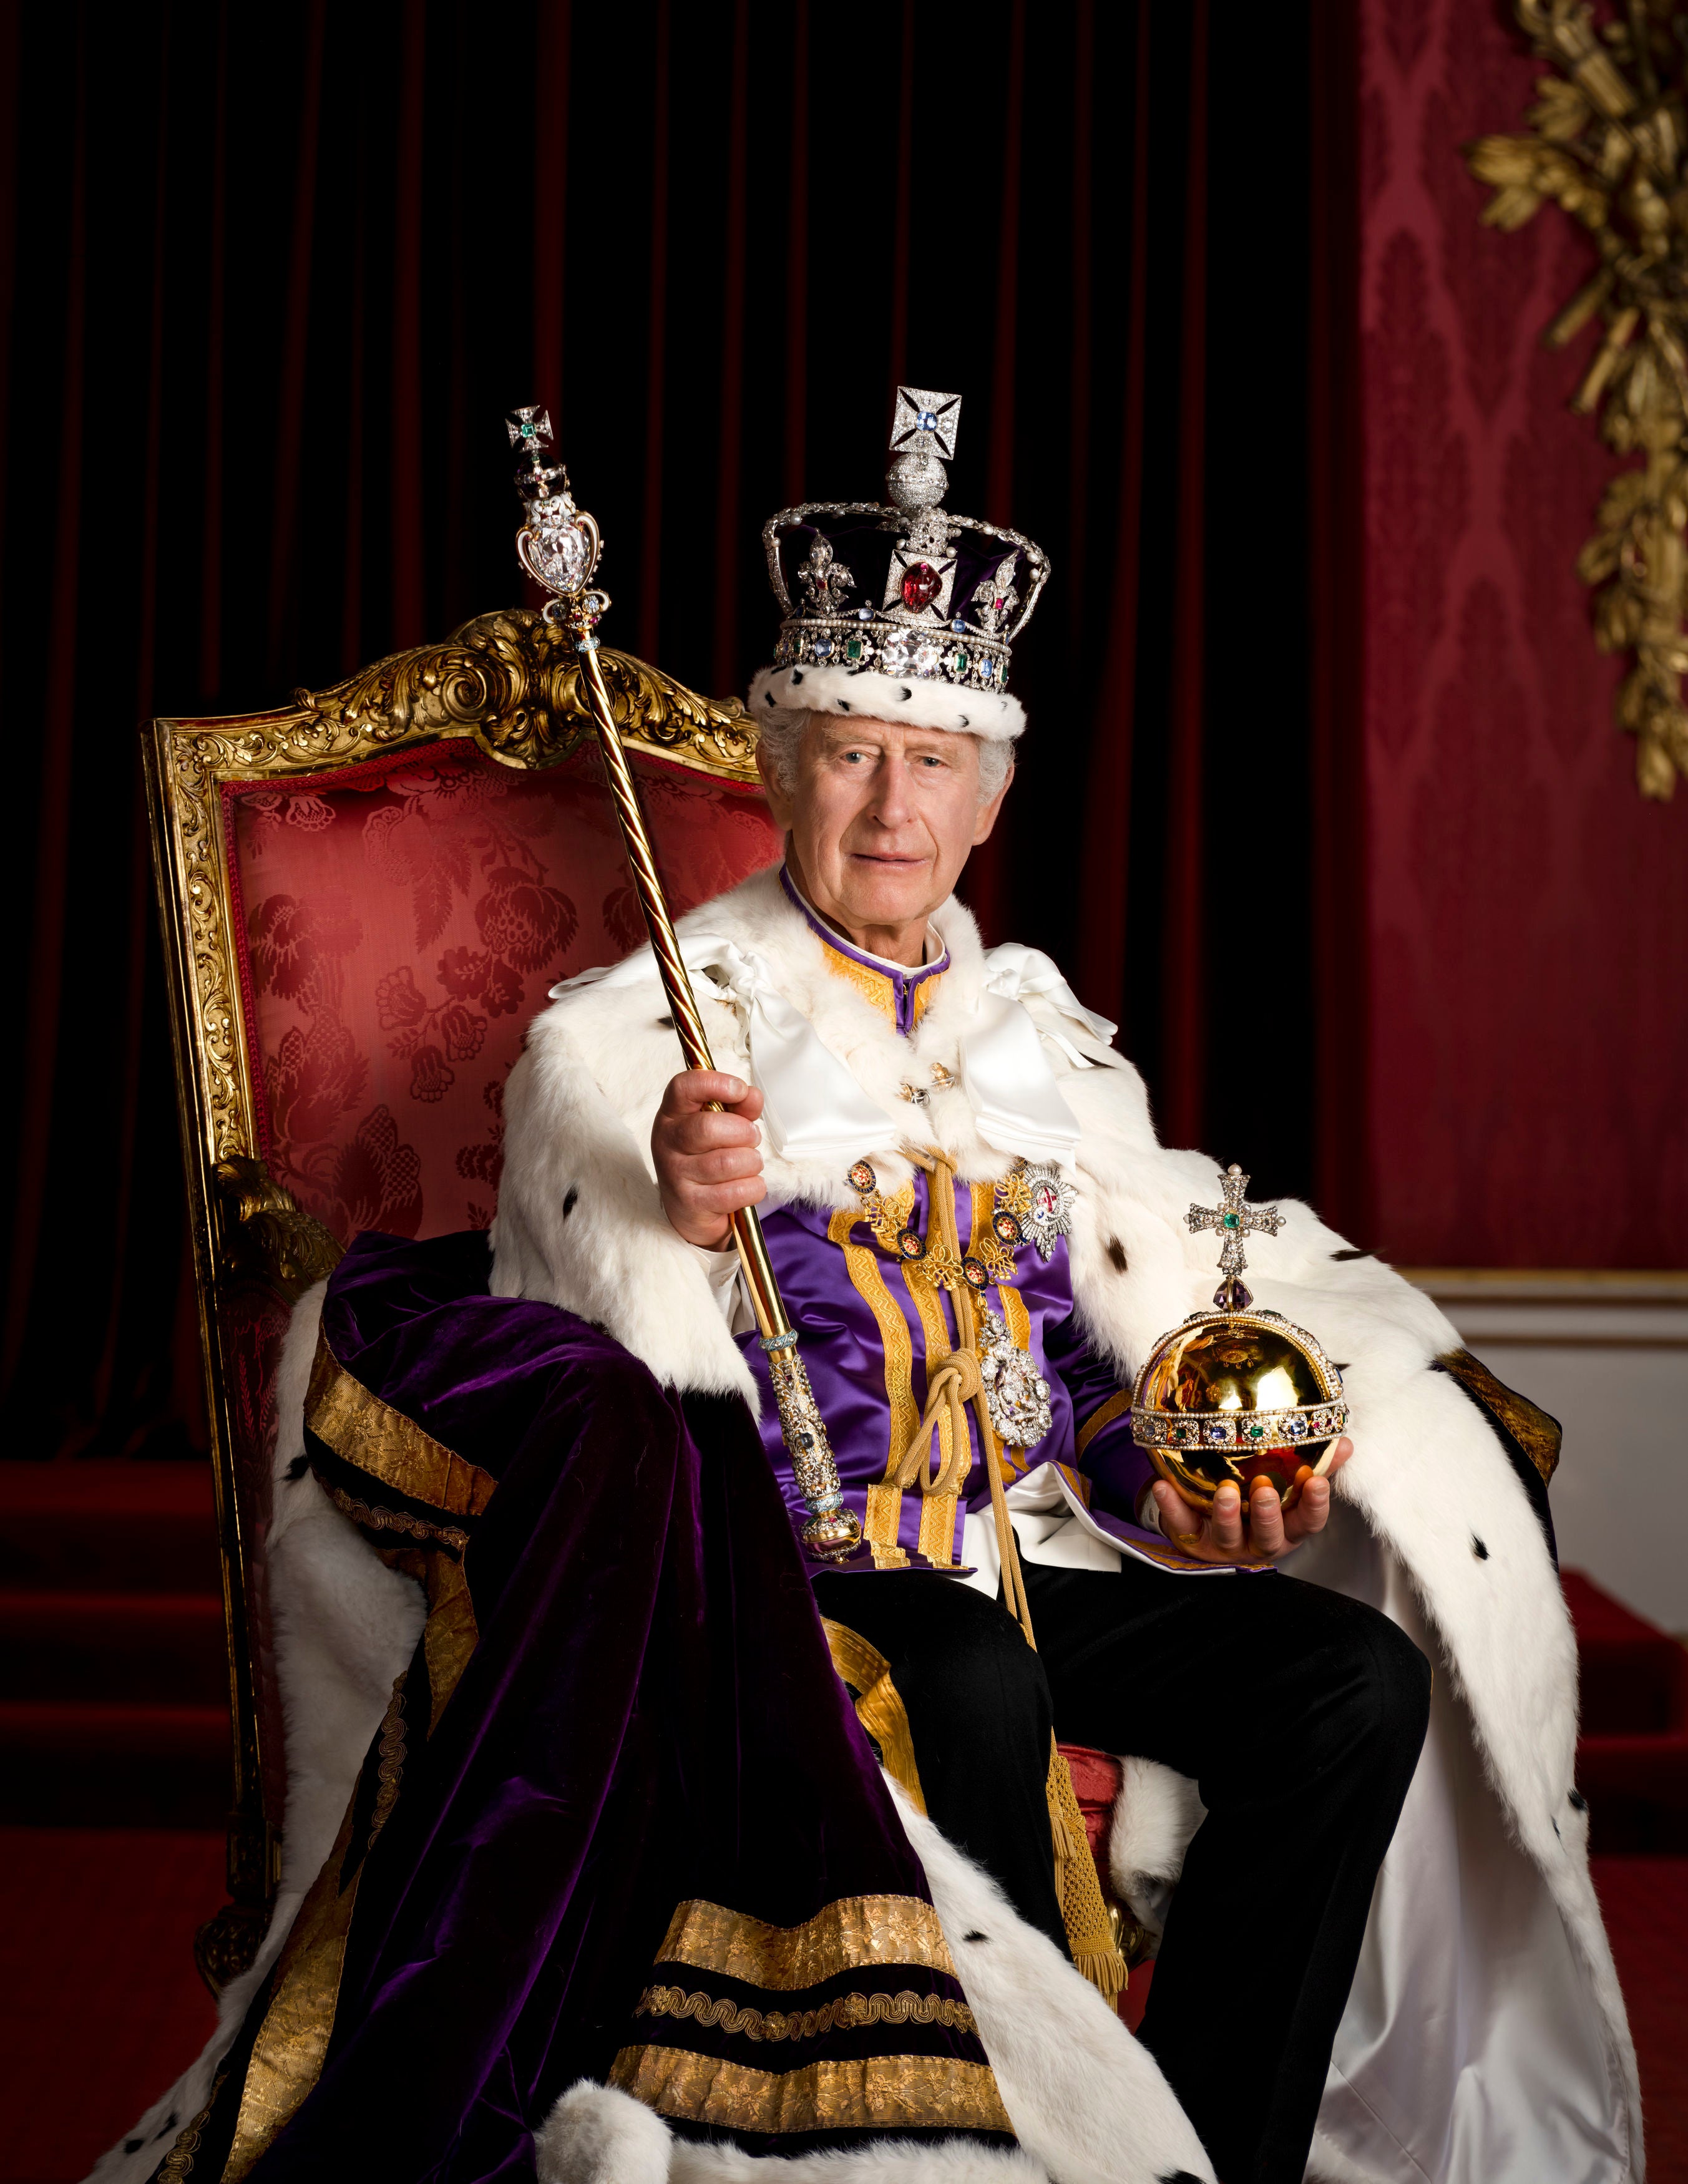 King Charles III in full regalia in the Throne Room at Buckingham Palace